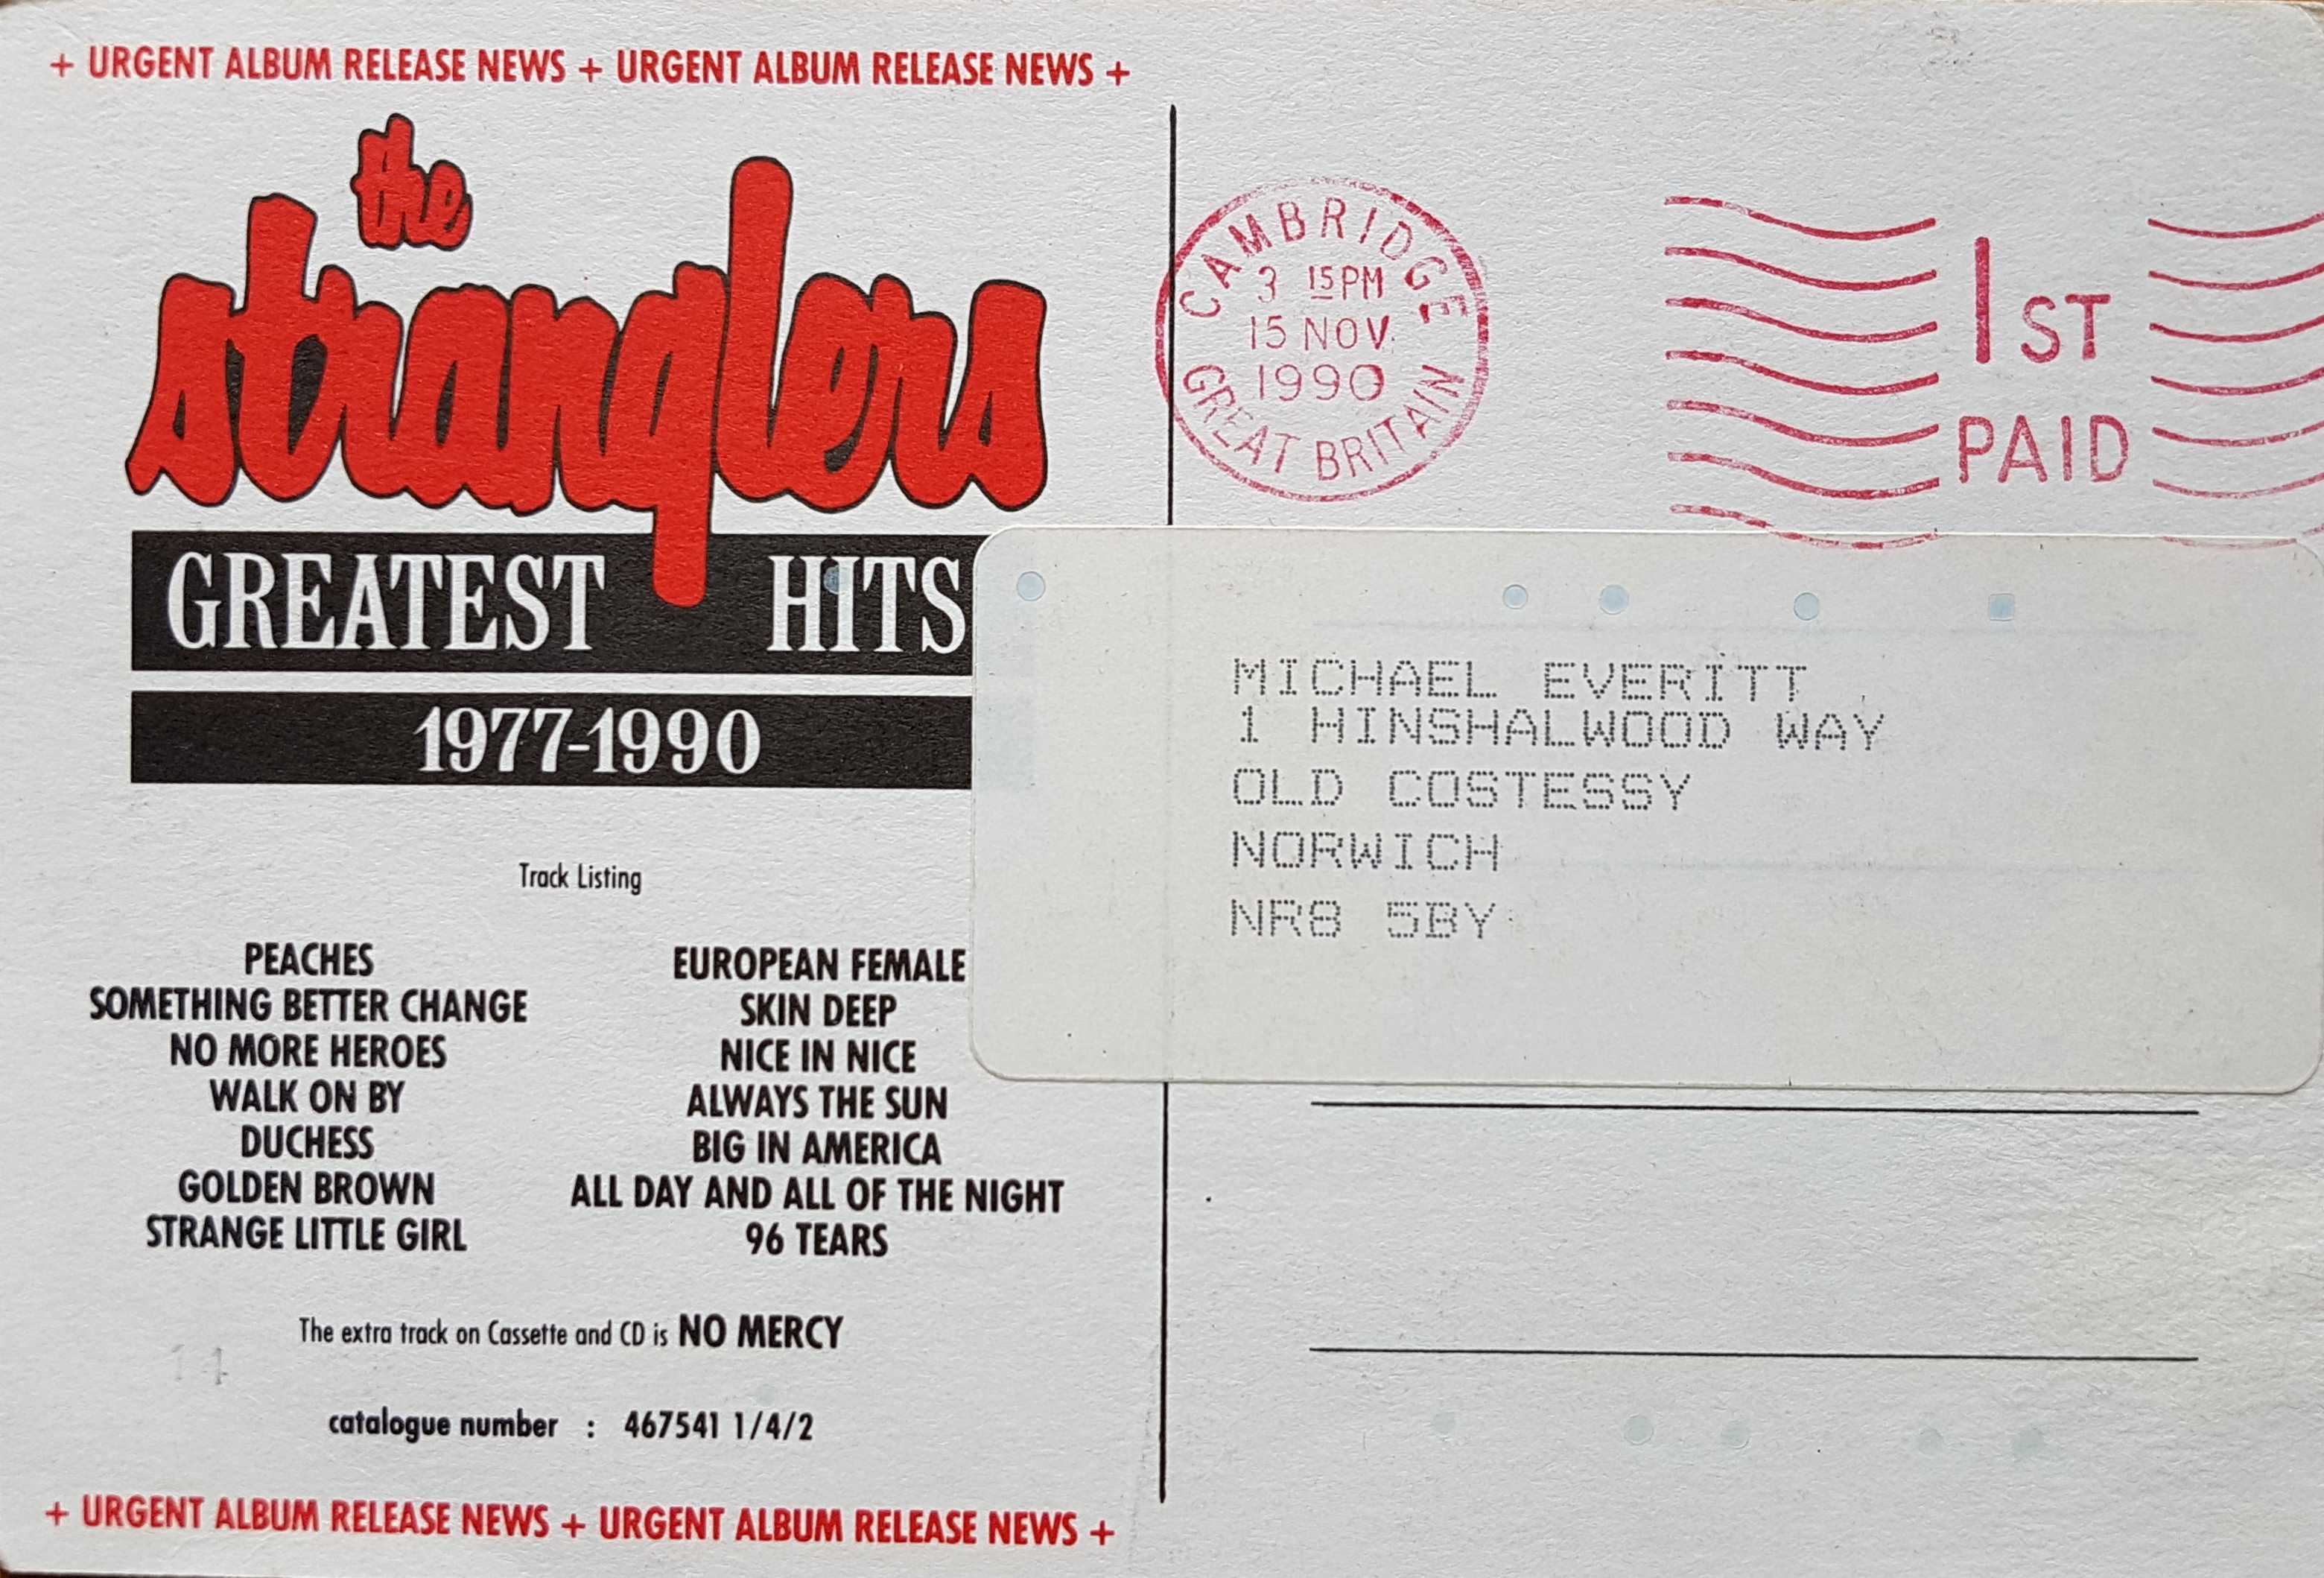 Picture of PC-Str-GH Greatest hits by artist The Stranglers  from The Stranglers